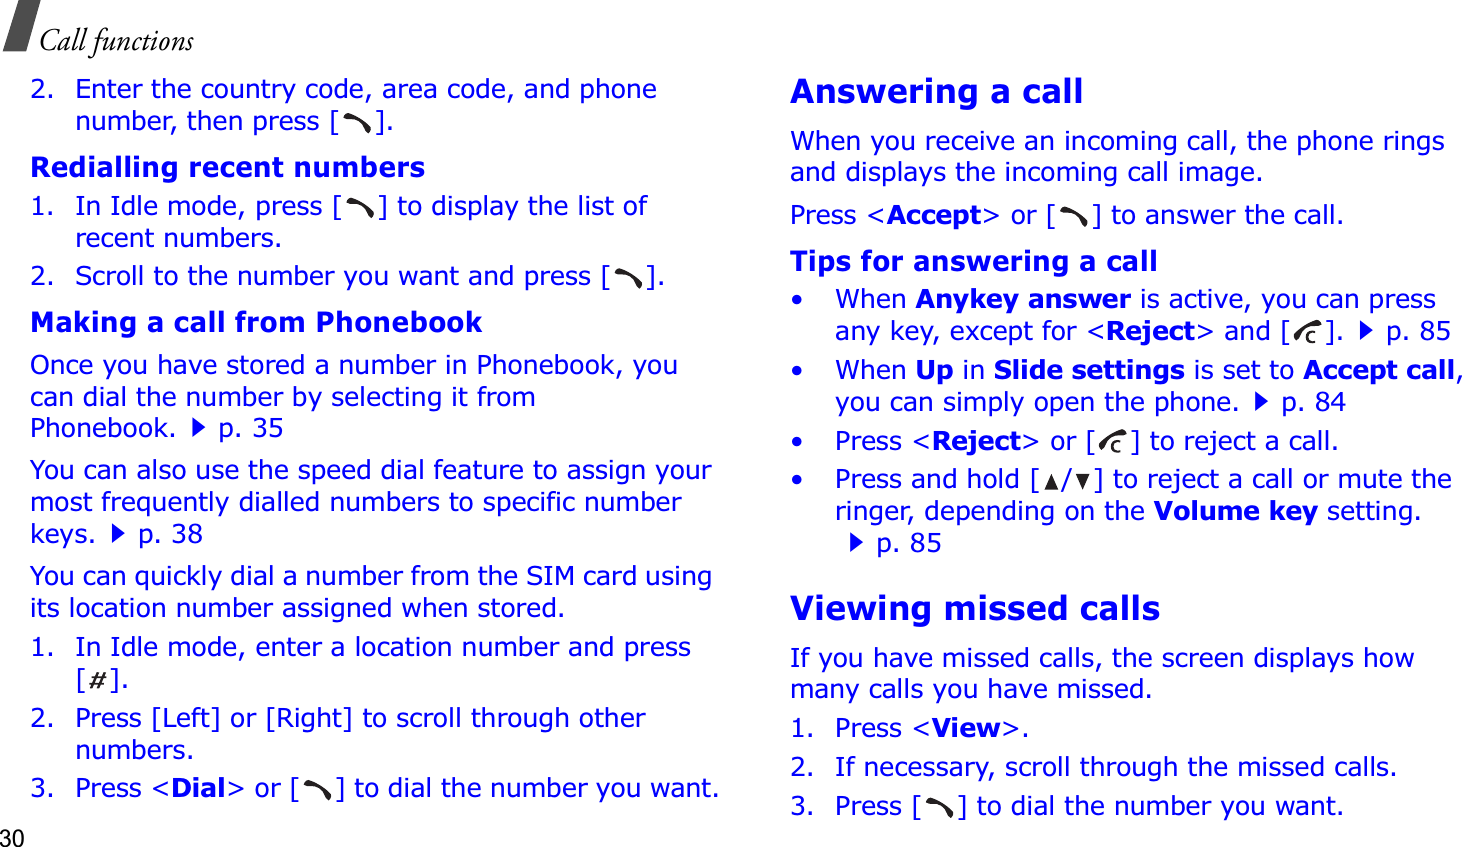 30Call functions2. Enter the country code, area code, and phone number, then press [ ].Redialling recent numbers1. In Idle mode, press [ ] to display the list of recent numbers.2. Scroll to the number you want and press [ ].Making a call from PhonebookOnce you have stored a number in Phonebook, you can dial the number by selecting it from Phonebook.p. 35You can also use the speed dial feature to assign your most frequently dialled numbers to specific number keys.p. 38You can quickly dial a number from the SIM card using its location number assigned when stored.1. In Idle mode, enter a location number and press [].2. Press [Left] or [Right] to scroll through other numbers.3. Press &lt;Dial&gt; or [ ] to dial the number you want.Answering a callWhen you receive an incoming call, the phone rings and displays the incoming call image. Press &lt;Accept&gt; or [ ] to answer the call.Tips for answering a call• When Anykey answer is active, you can press any key, except for &lt;Reject&gt; and [ ].p. 85• When Up in Slide settings is set to Accept call,you can simply open the phone.p. 84• Press &lt;Reject&gt; or [ ] to reject a call.• Press and hold [ / ] to reject a call or mute the ringer, depending on the Volume key setting.p. 85Viewing missed callsIf you have missed calls, the screen displays how many calls you have missed.1. Press &lt;View&gt;.2. If necessary, scroll through the missed calls.3. Press [ ] to dial the number you want.